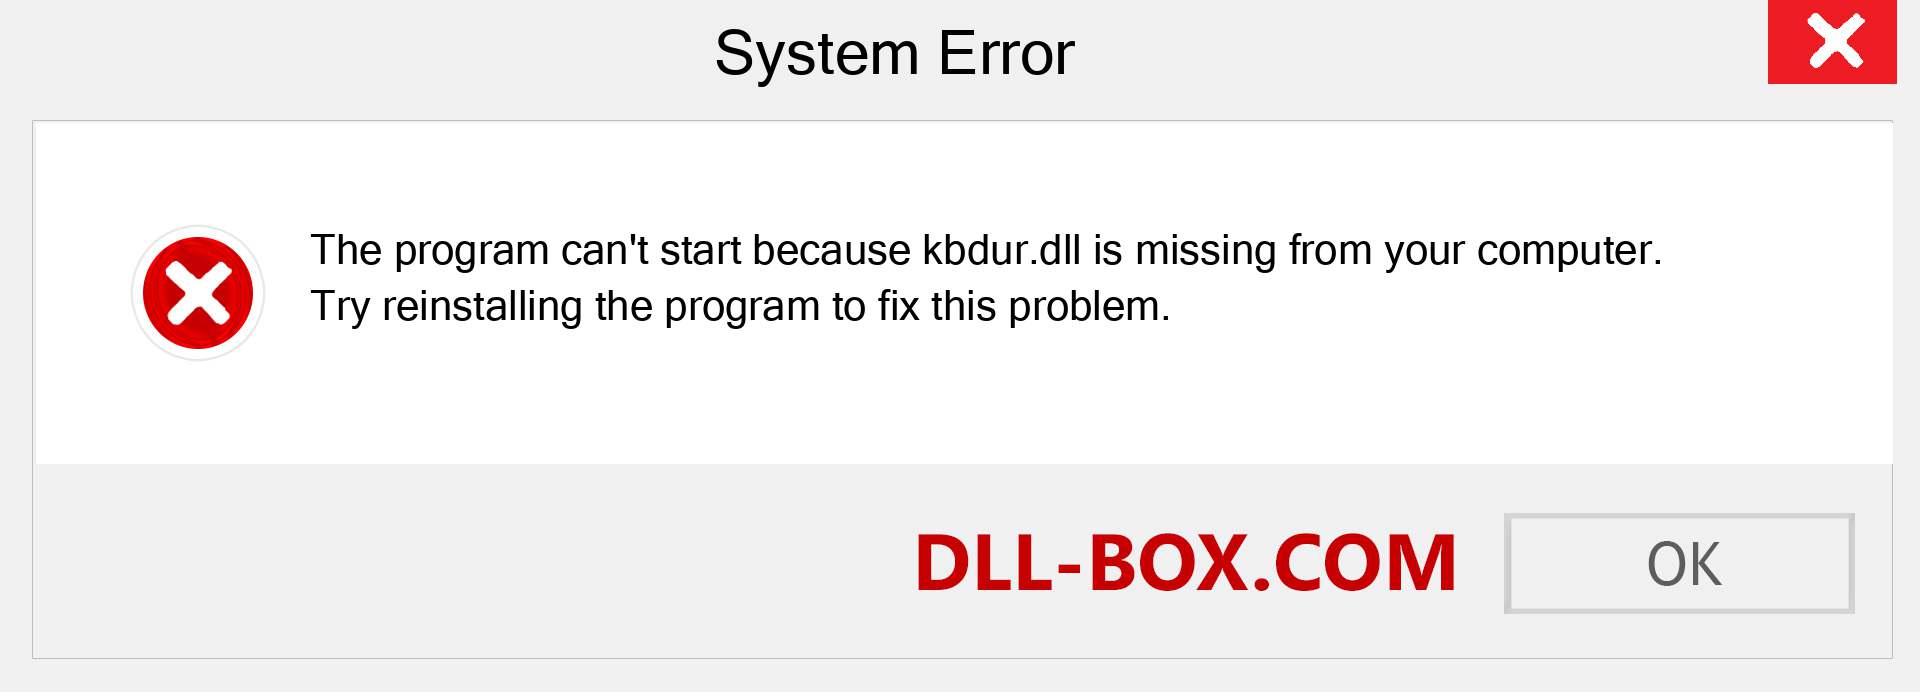  kbdur.dll file is missing?. Download for Windows 7, 8, 10 - Fix  kbdur dll Missing Error on Windows, photos, images